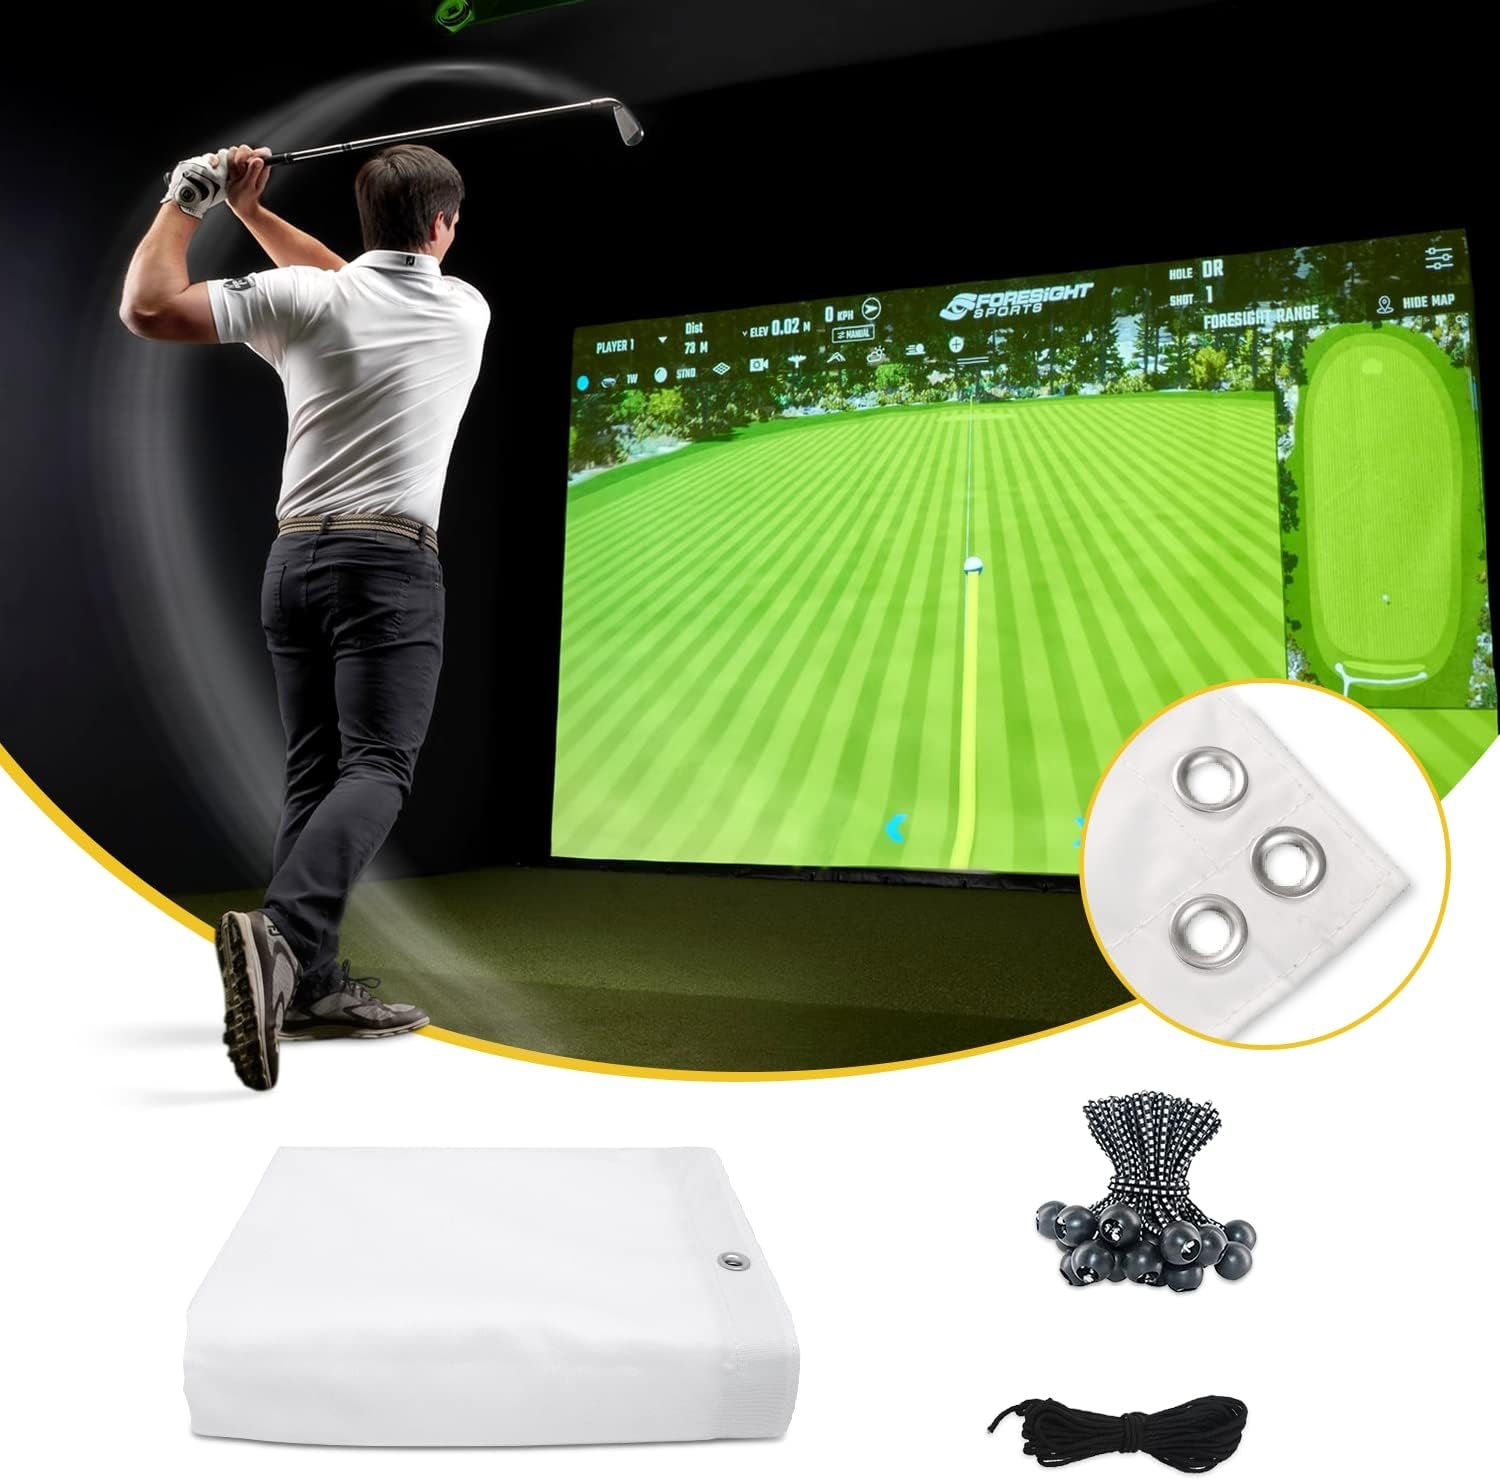 amazgolf Golf Simulator Impact Screen（Sizes Range from 21 inches to 157 inches） for Golf Training, Indoor Golf Simulators for Home, Ultra Clear Washable Golf Impact Screen for Indoor Golf Practice